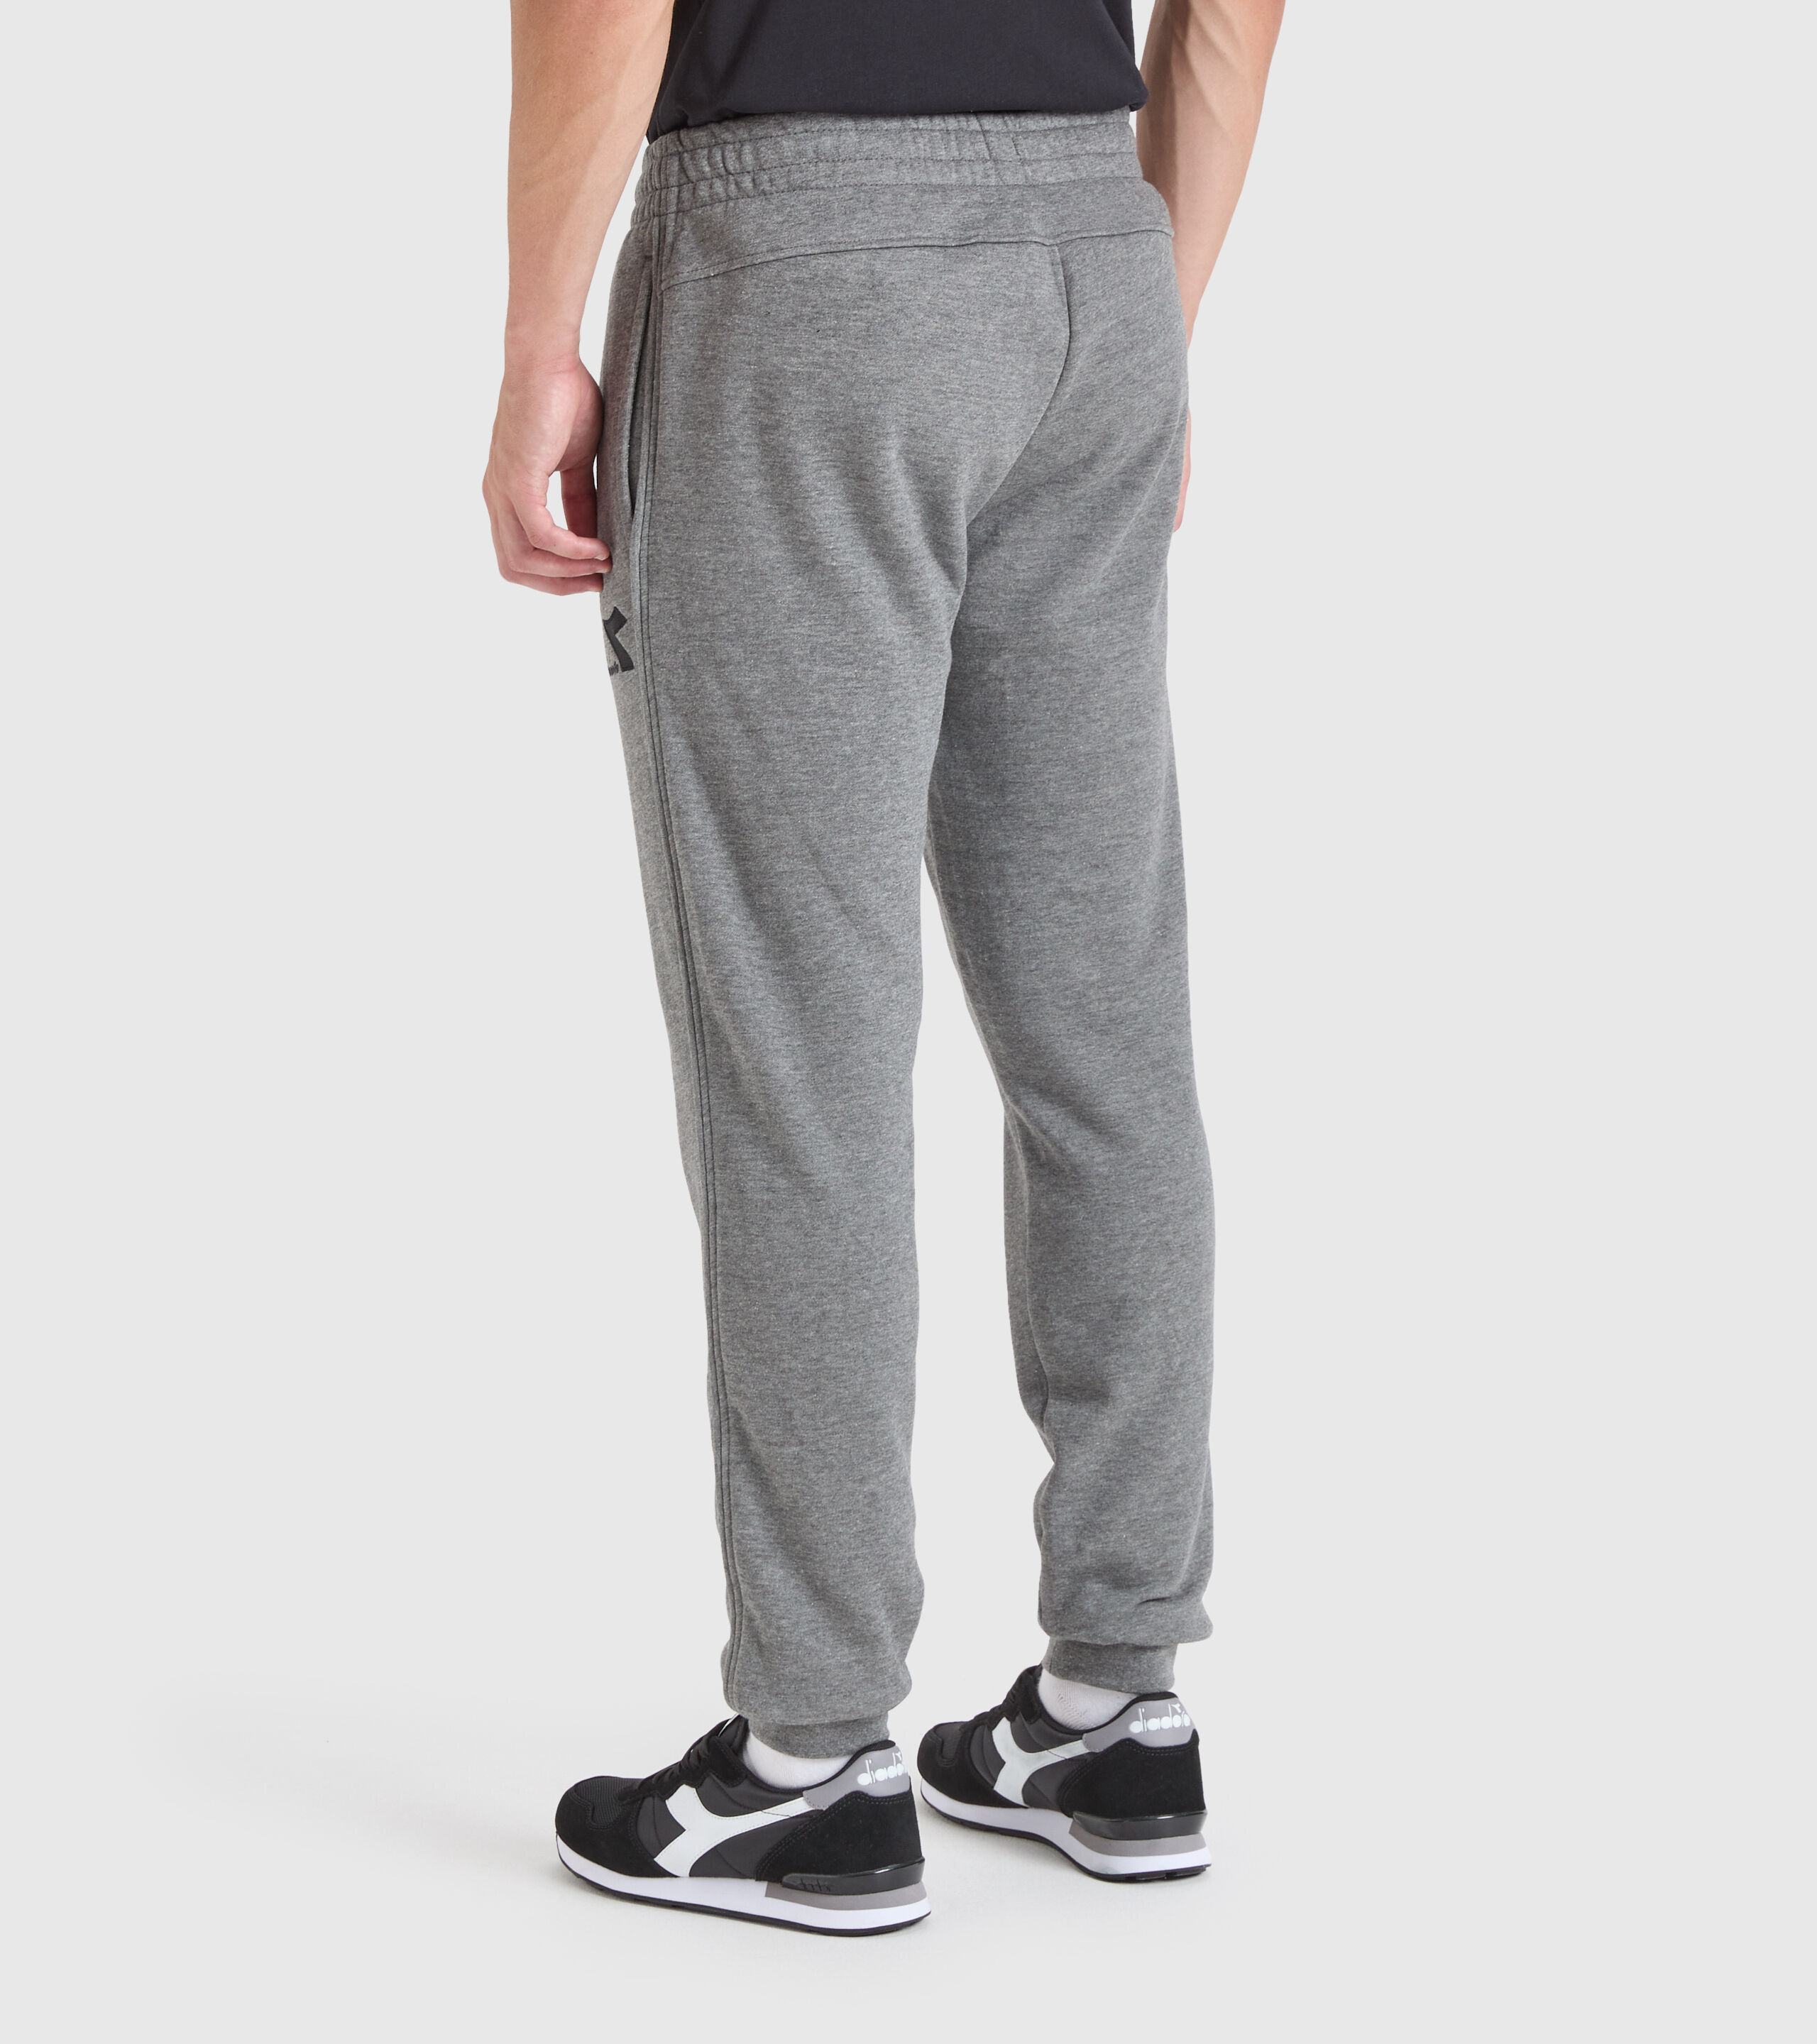 Adidas Trousers - Top Selection & Easy Returns – Allike Store